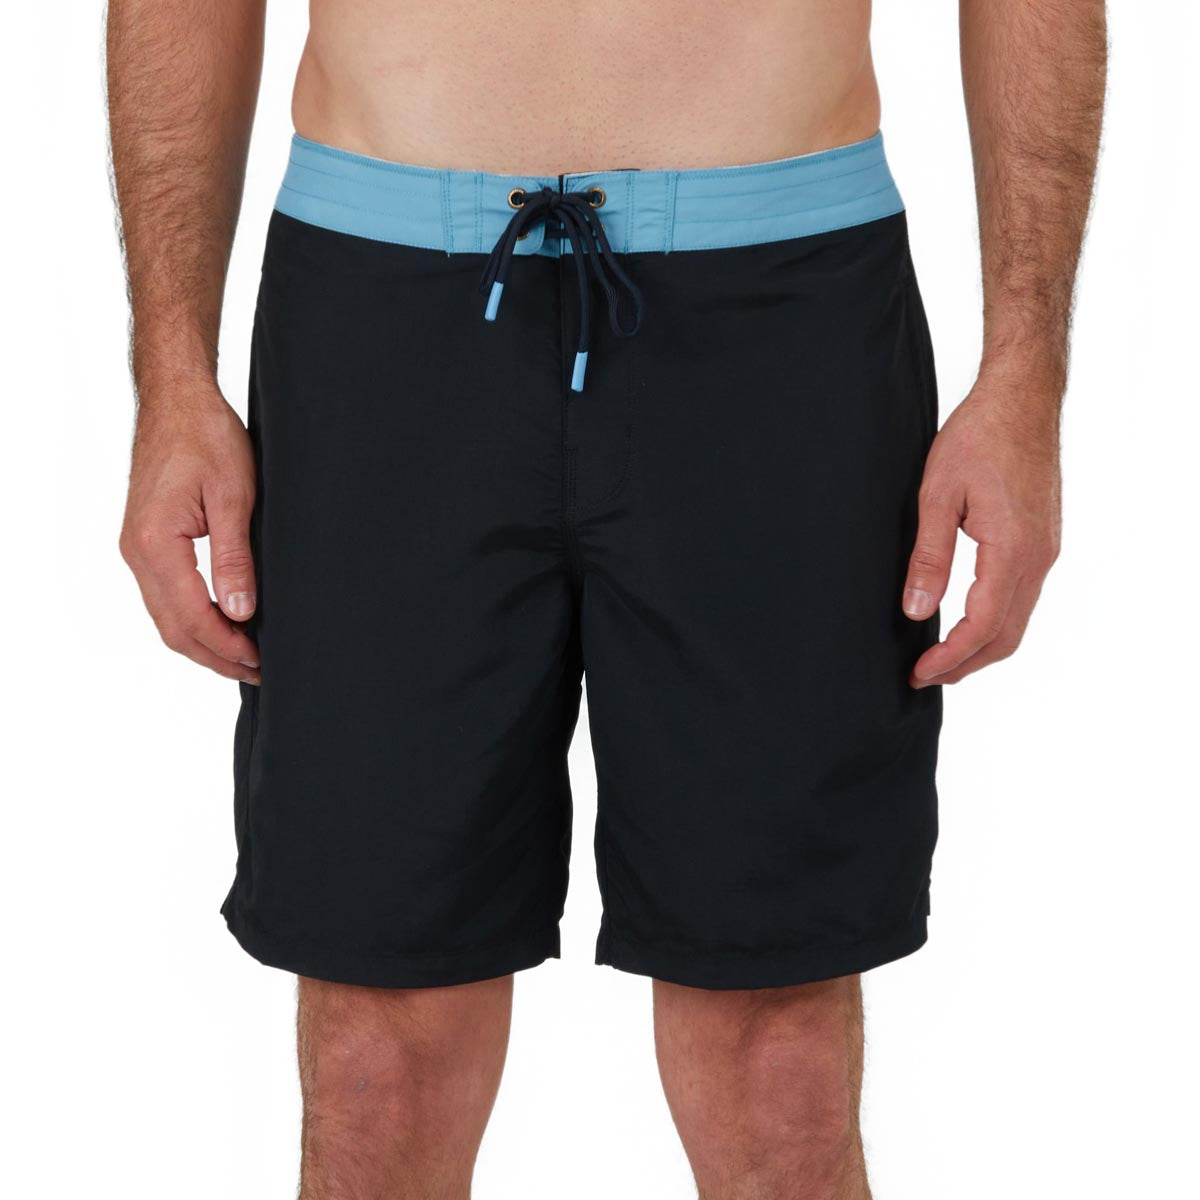 Salty Crew Clubhouse Board Shorts - Black image 2